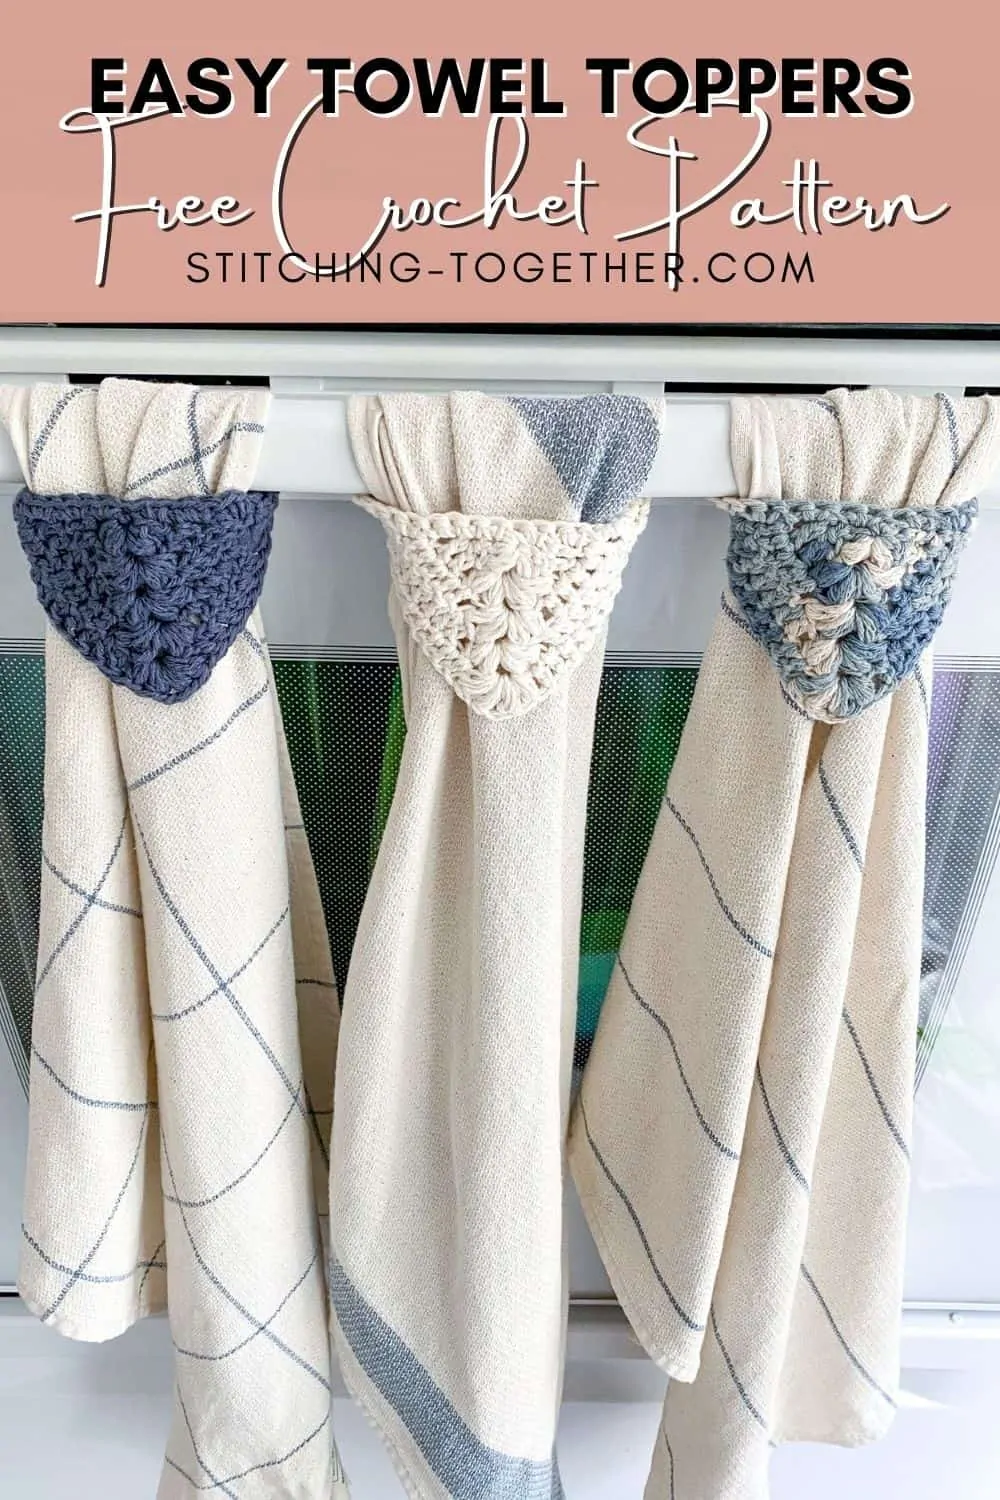 pin image of 3 hanging kitchen towels with crochet toppers